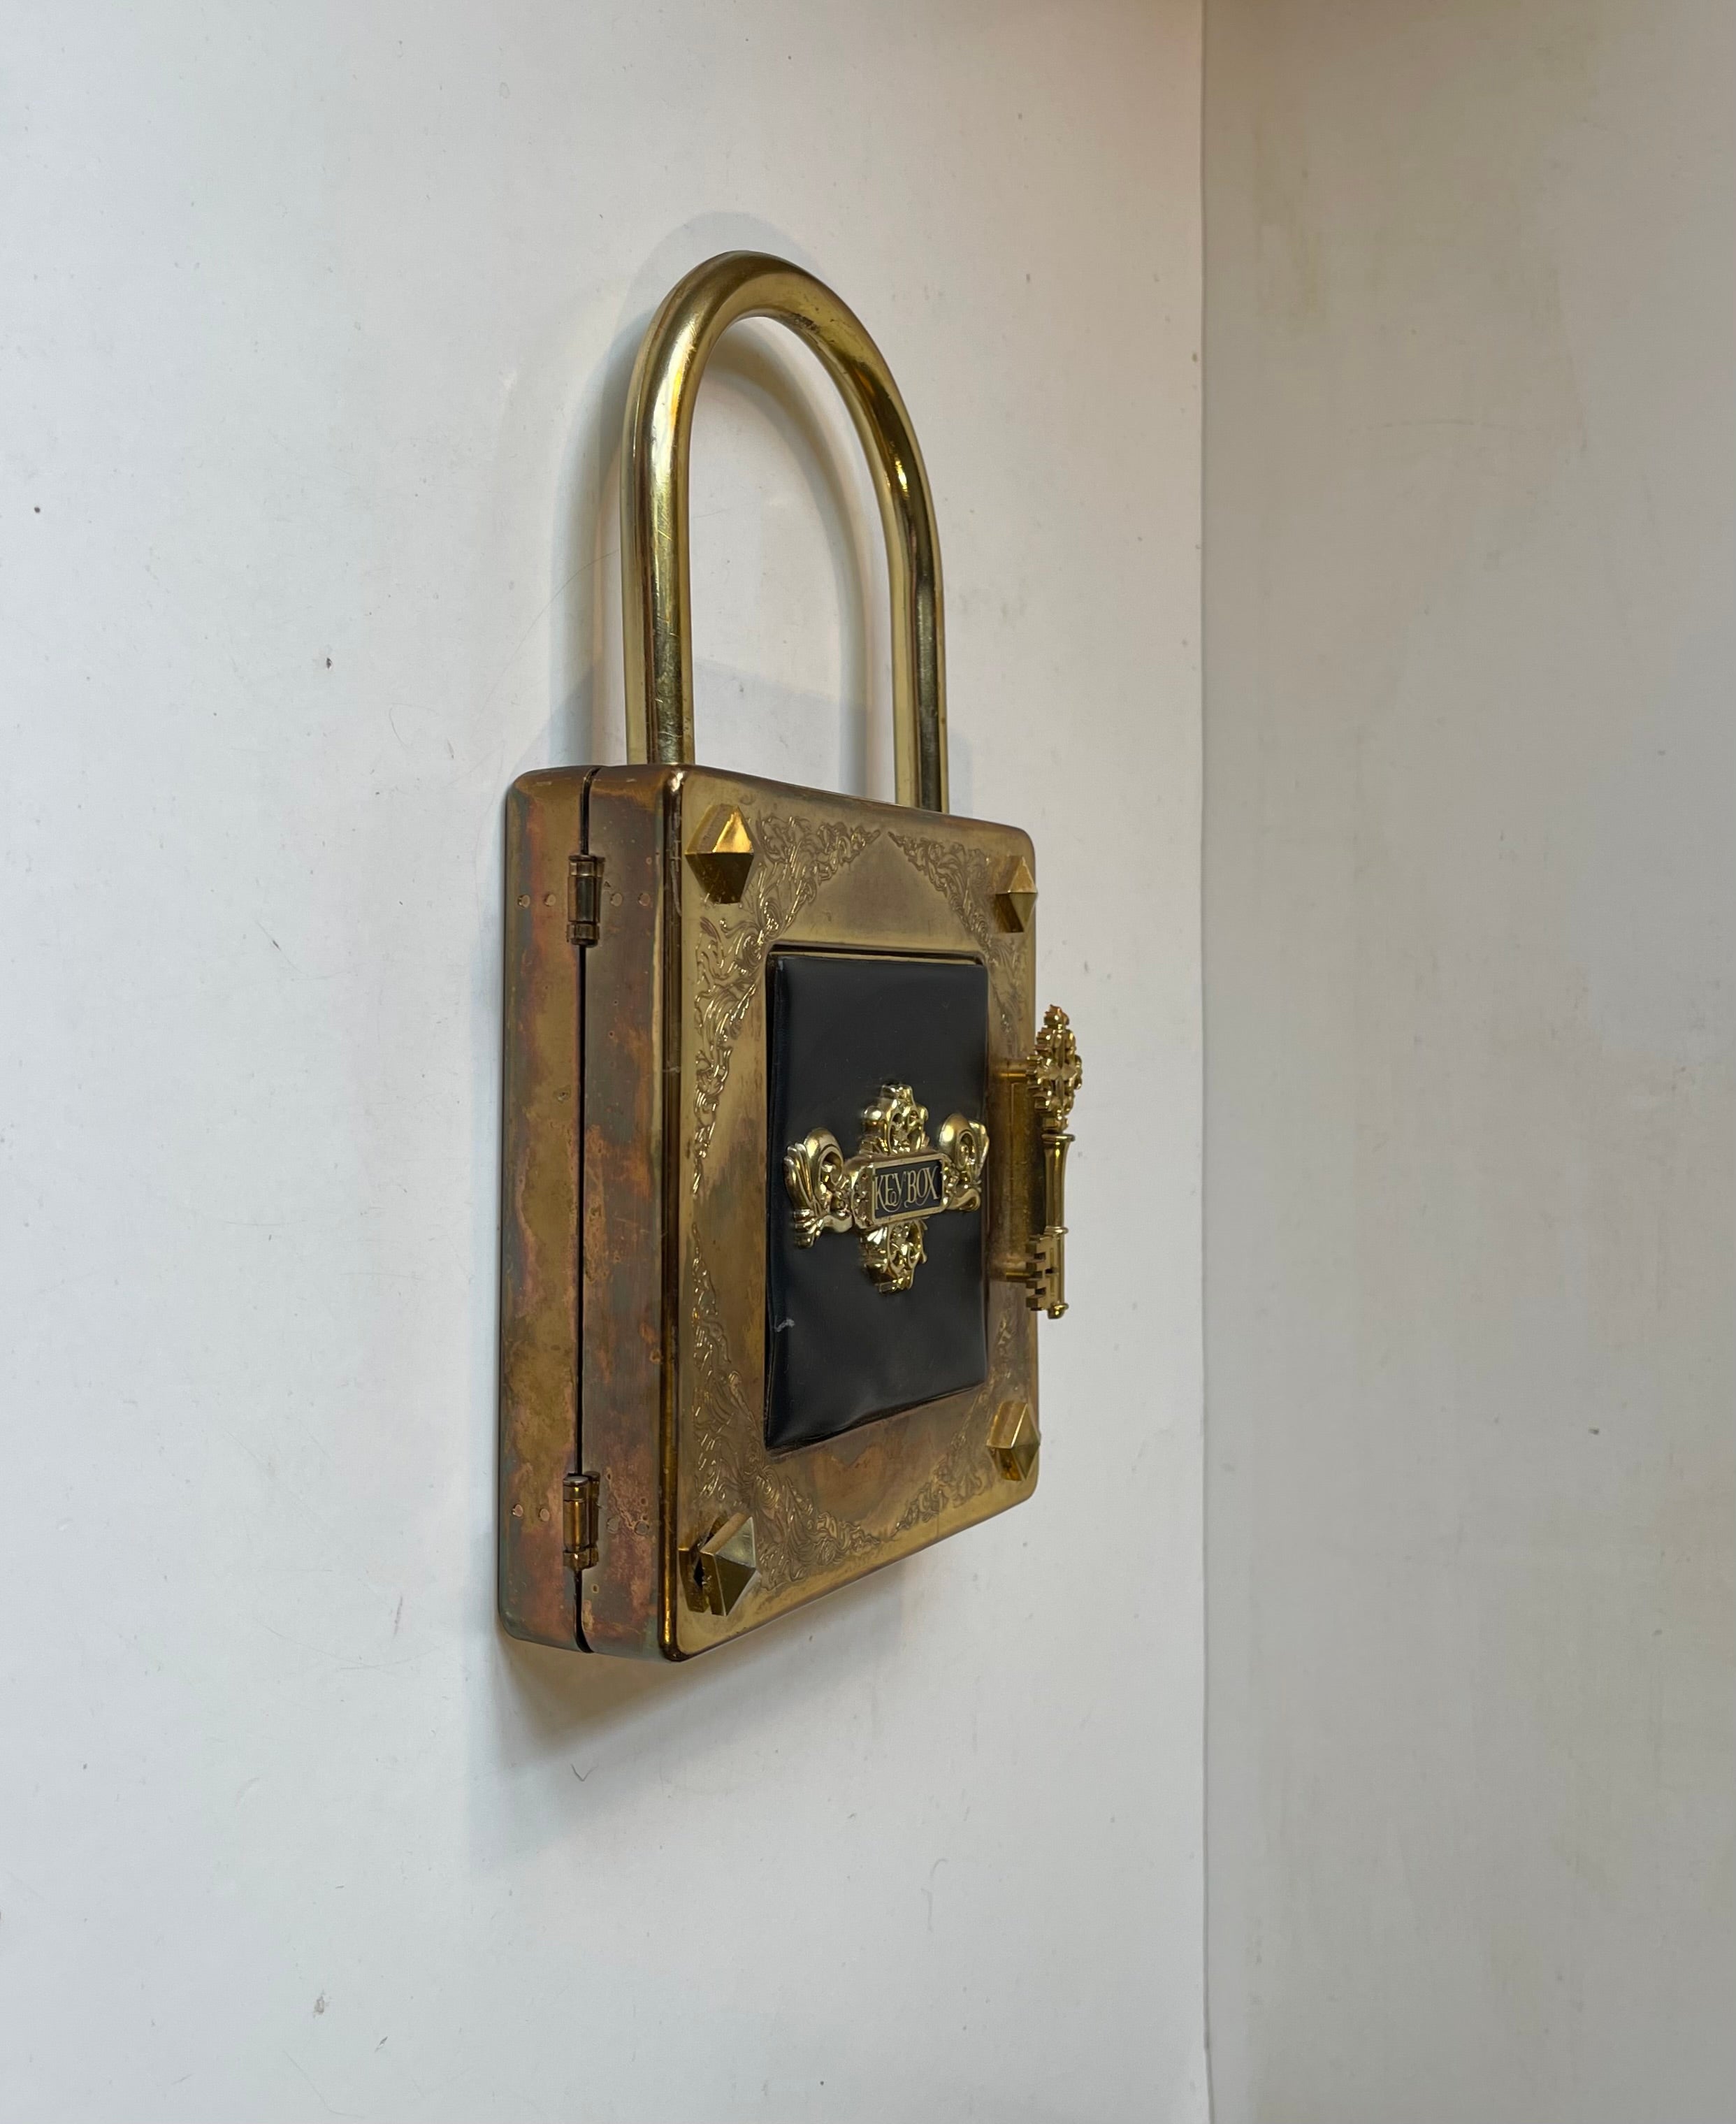 Japanese novelty wall mounted key hanger in the shape of this jumbo padlock in patinated brass. Curious details with xl revits and key.shaped handle. Intact black acrylic-lined interior with note-blok and 7 key-hooks. Made in a midcentury style in